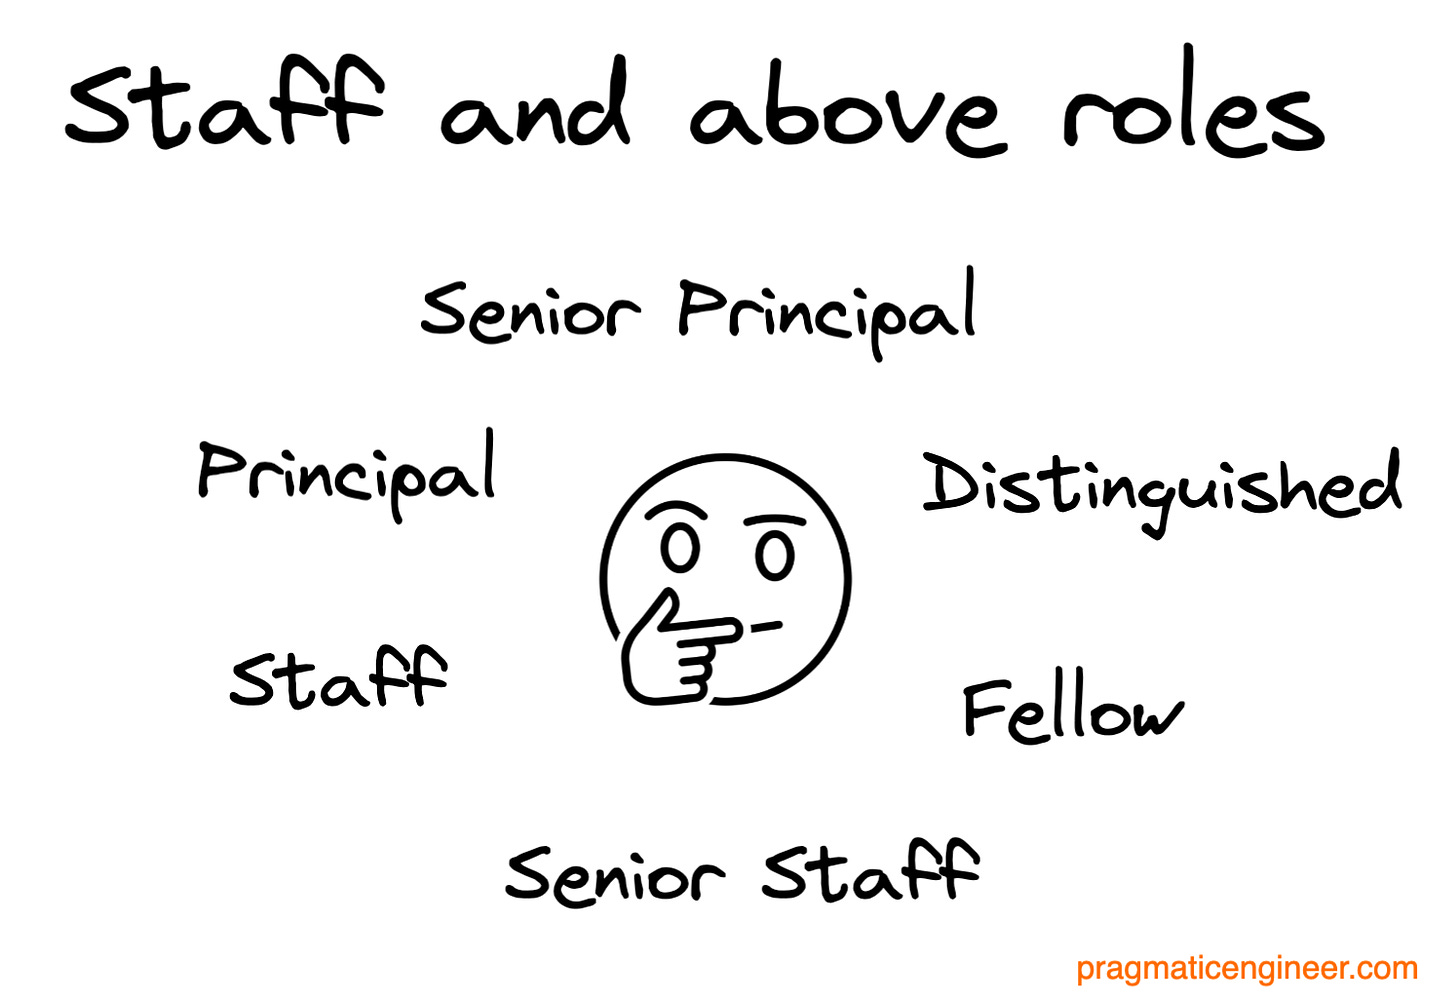 Staff and above roles. Each company has different expectations of Staff+ levels.